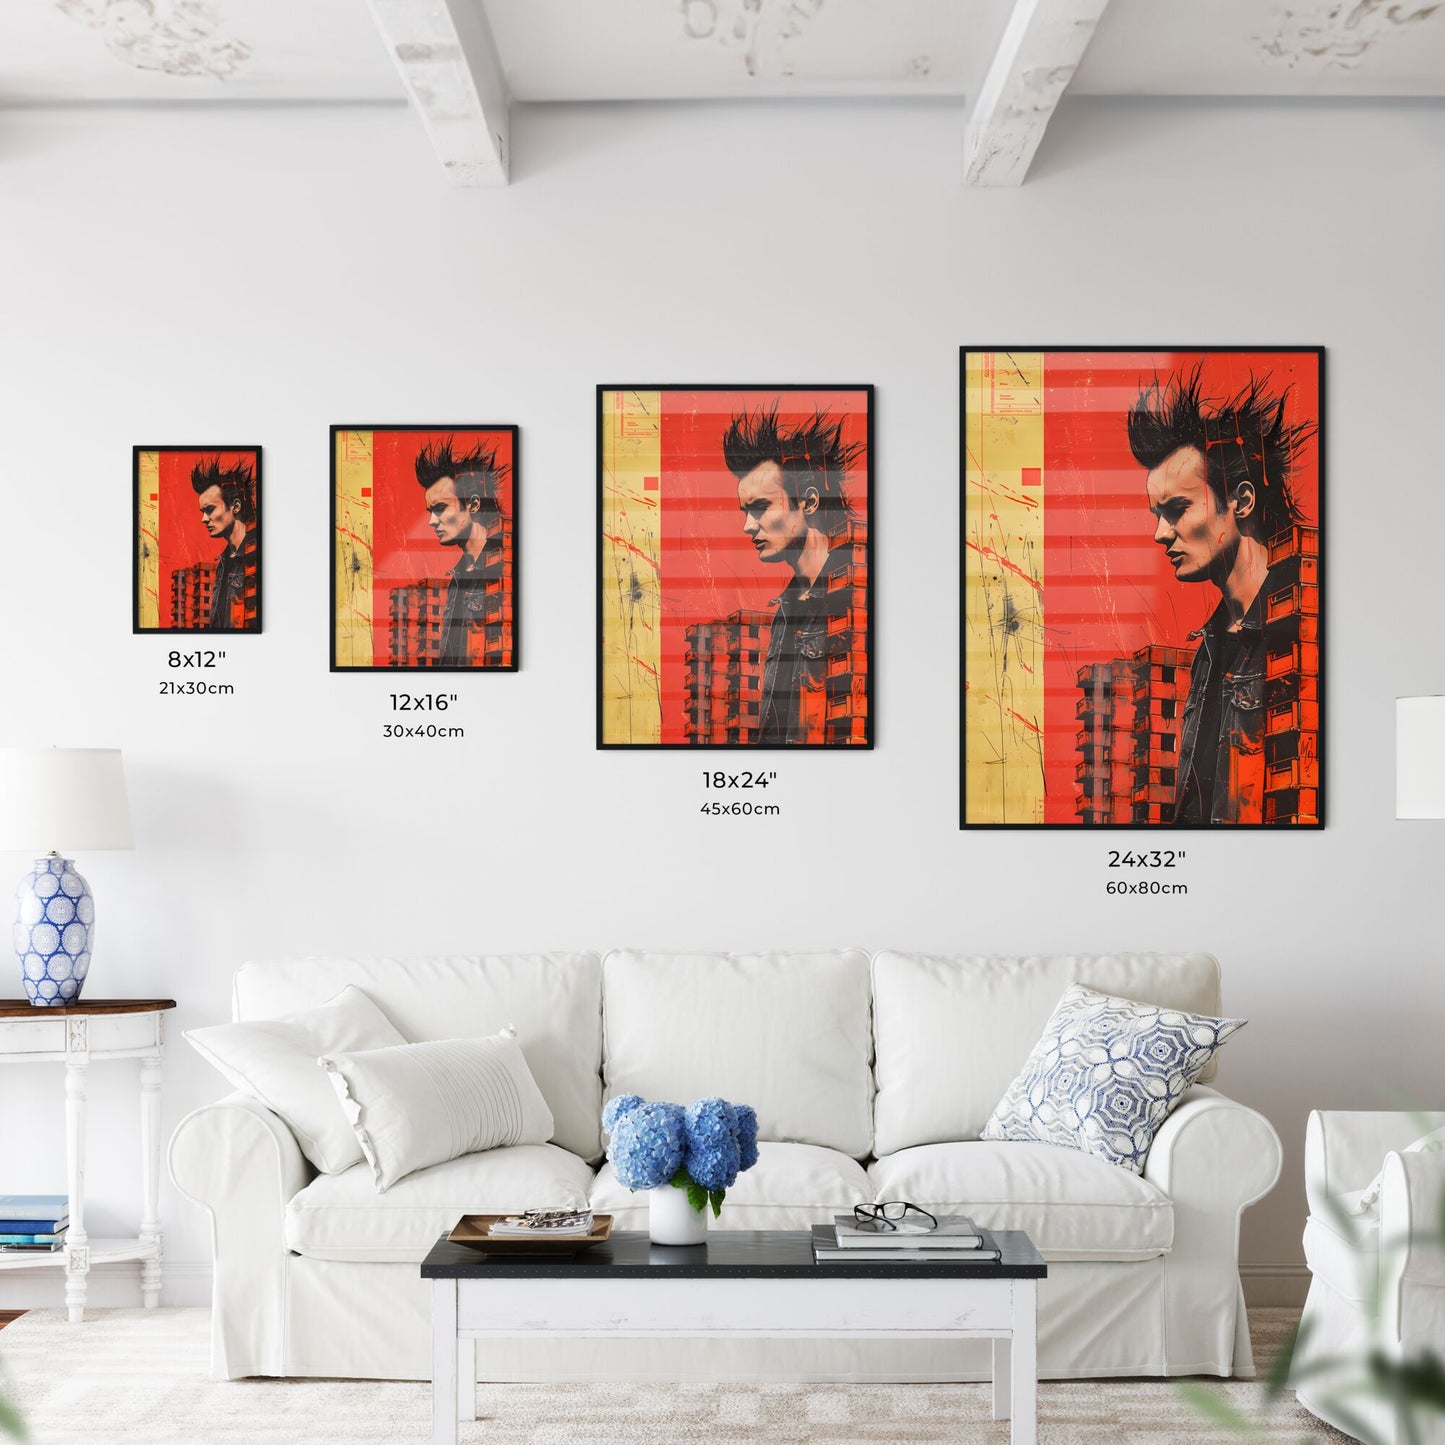 Vibrant Brutalism Painting: Spiky-Haired Man in Striking Graphic Style Default Title